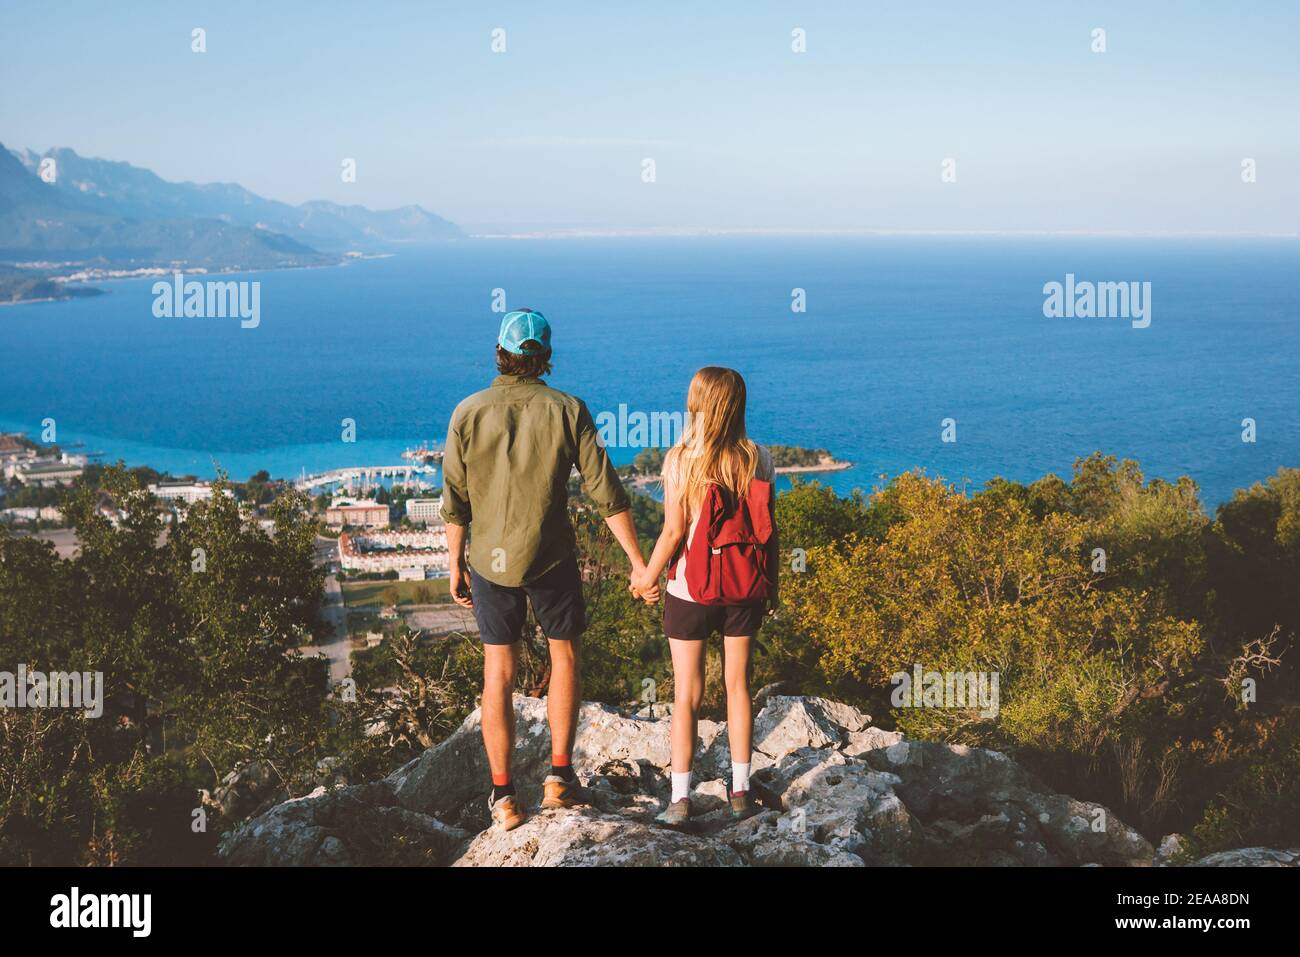 Couple in love man and woman holding hands on mountain top friends traveling together in Turkey enjoying view vacation trip lifestyle outdoor mediterr Stock Photo